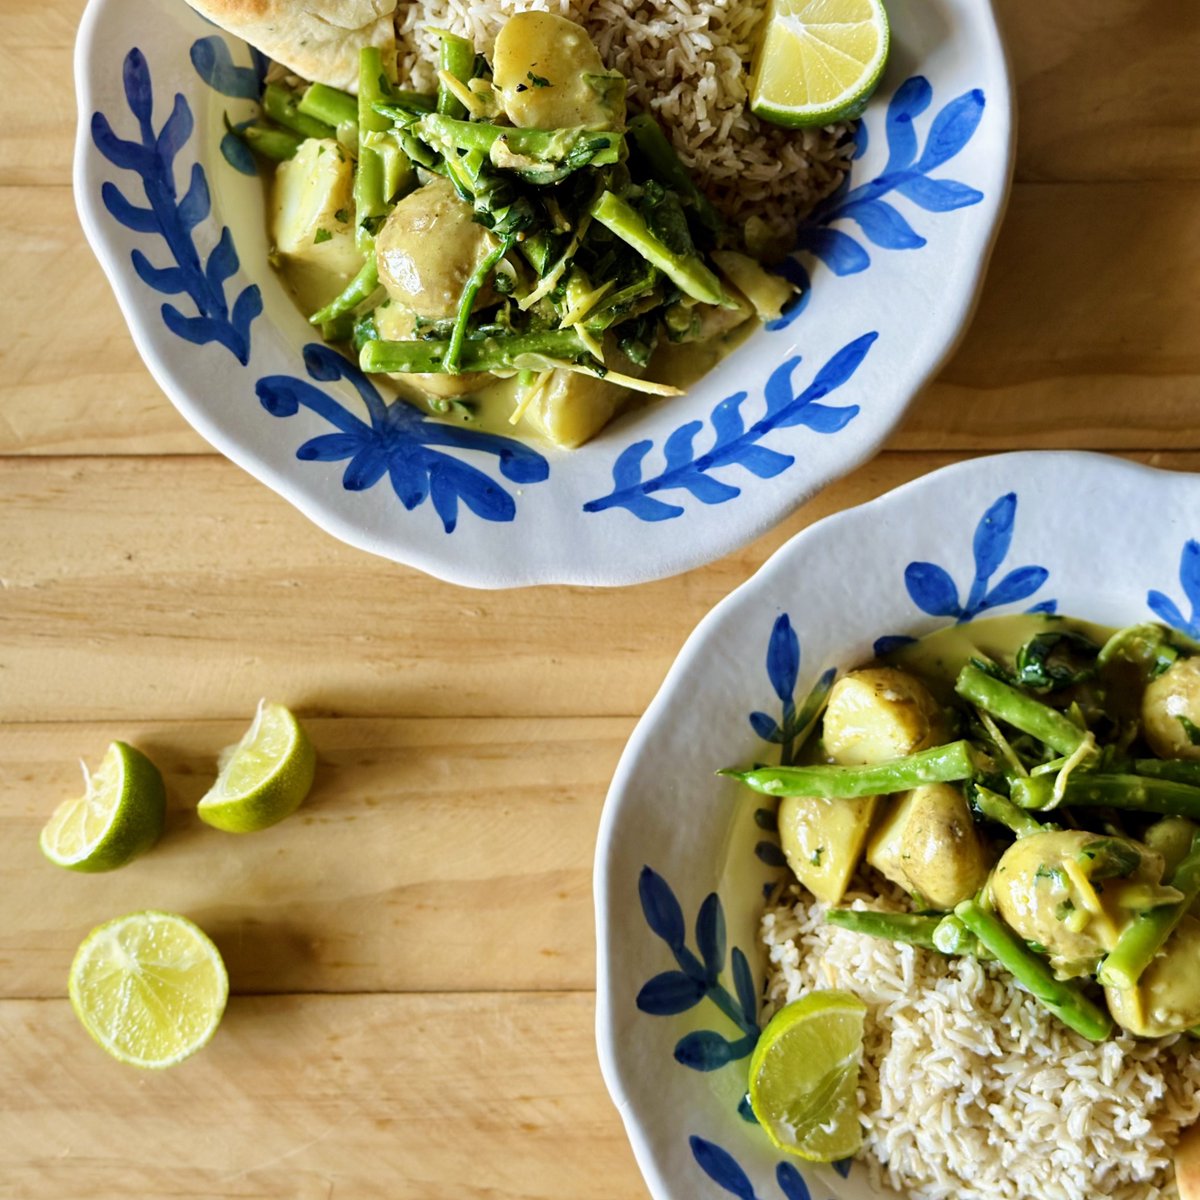 A fresh, zesty yet warming #JerseyRoyal coconut curry. Beautifully aromatic, this dish is packed full of flavour making it another great way to make the most of these lovely new potatoes while they’re in season. Link to recipe below bit.ly/45P6EiQ